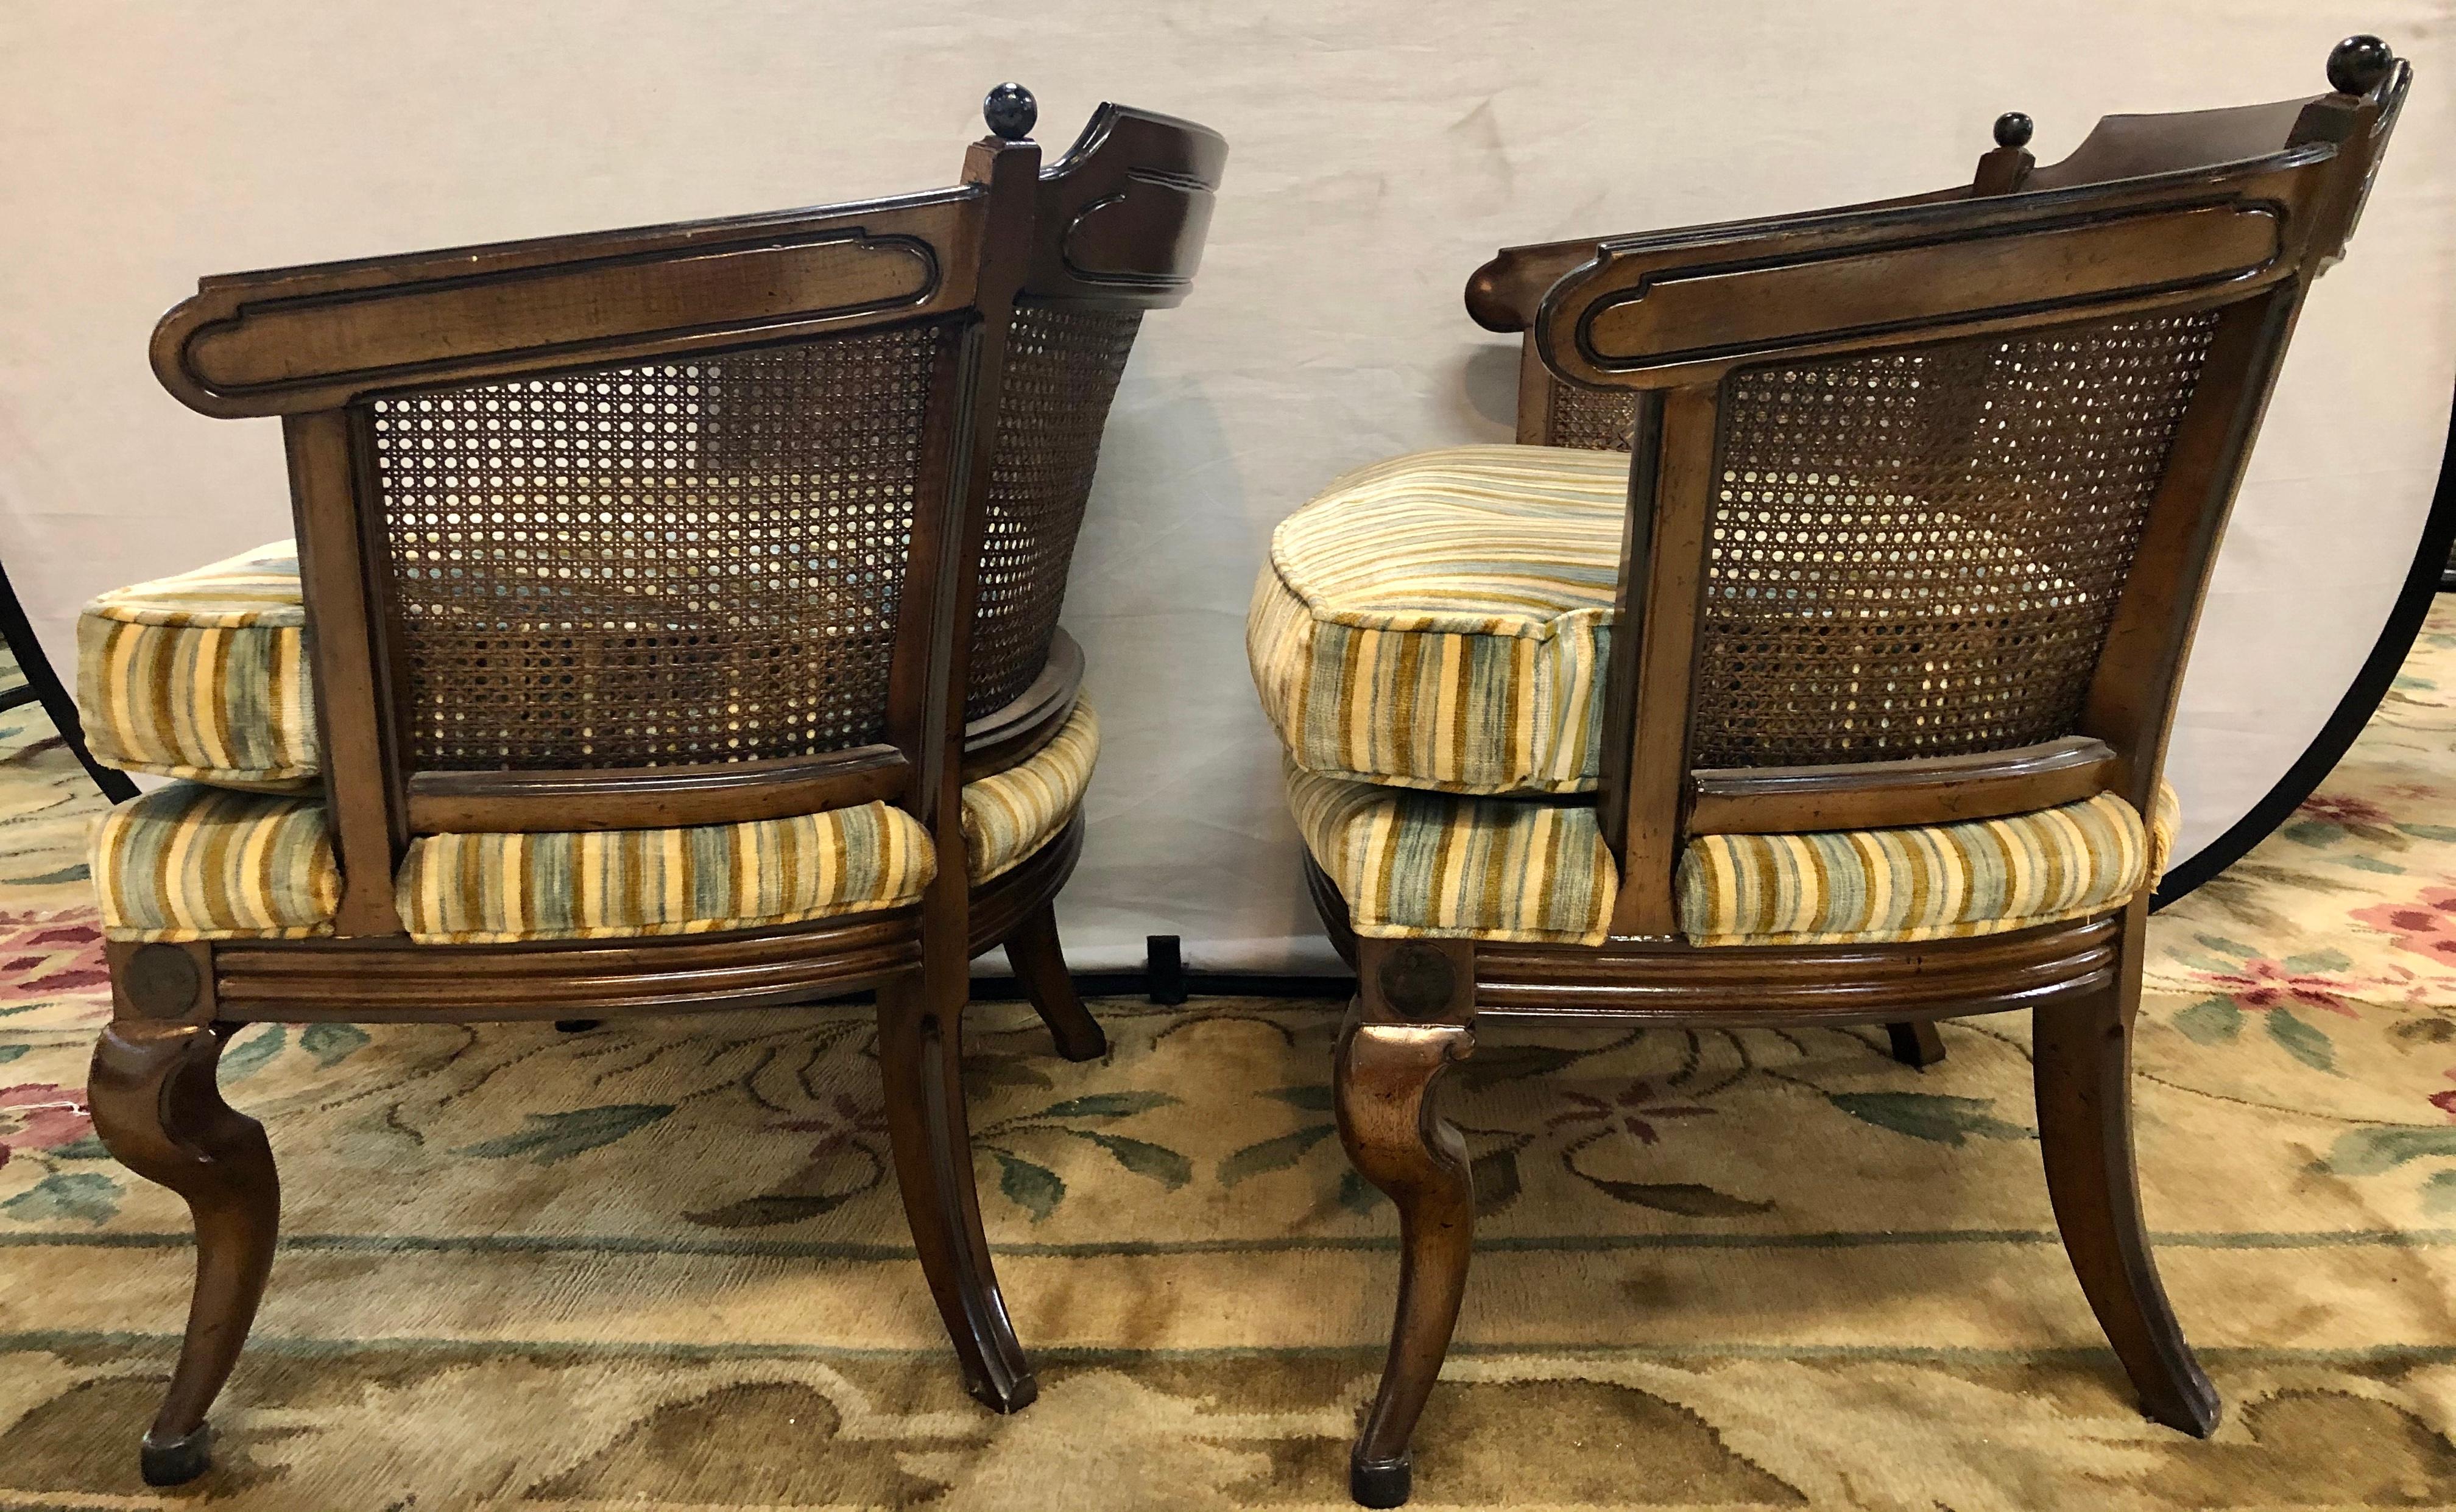 Pair of Mid-Century Modern Tub Chairs in Striped Upholstery with Cushion 8